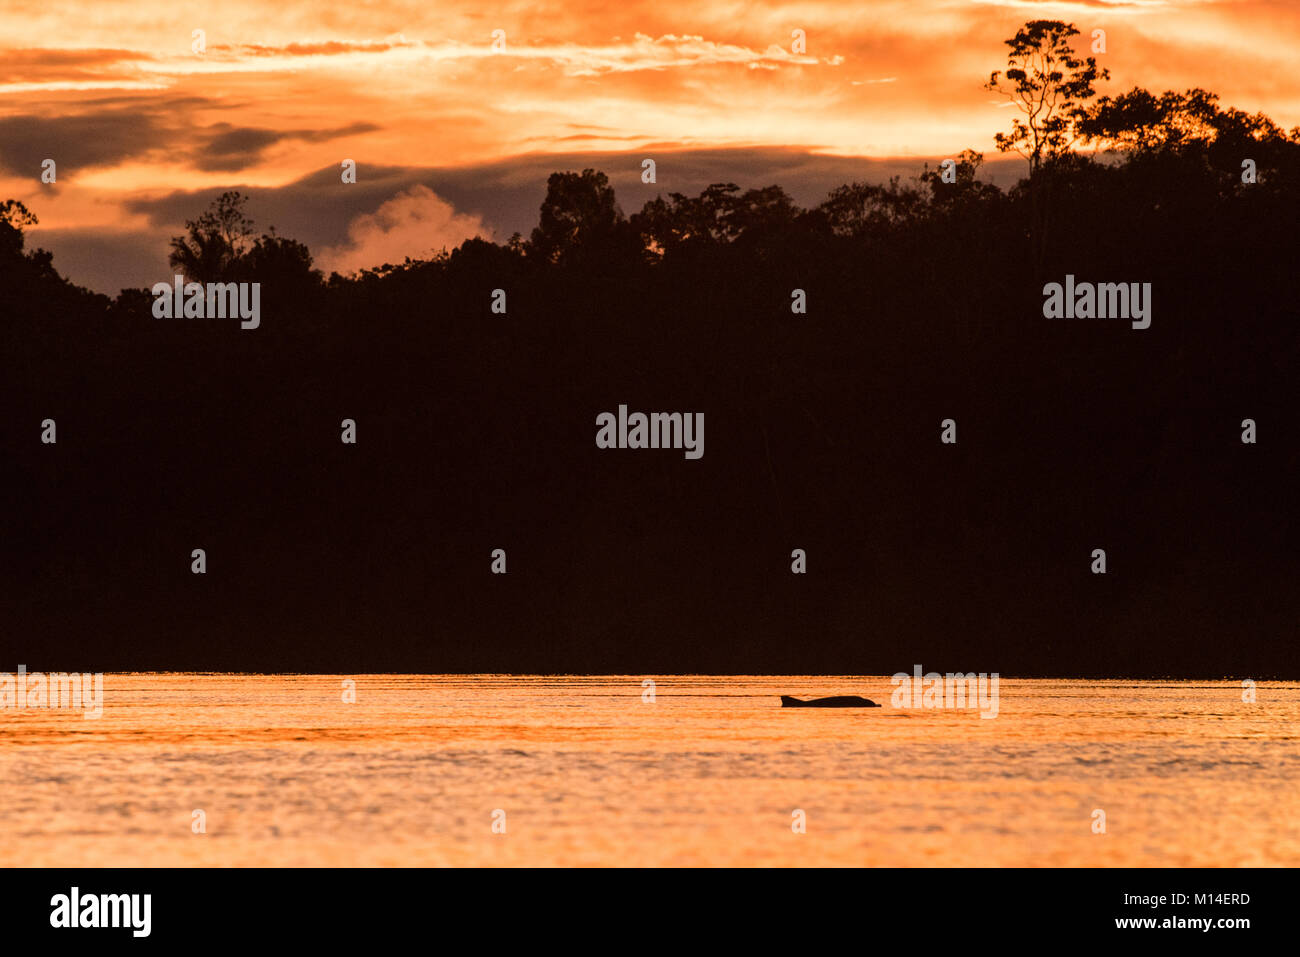 The sun setting over the Amazon river as a river dolphin surfaces. Stock Photo